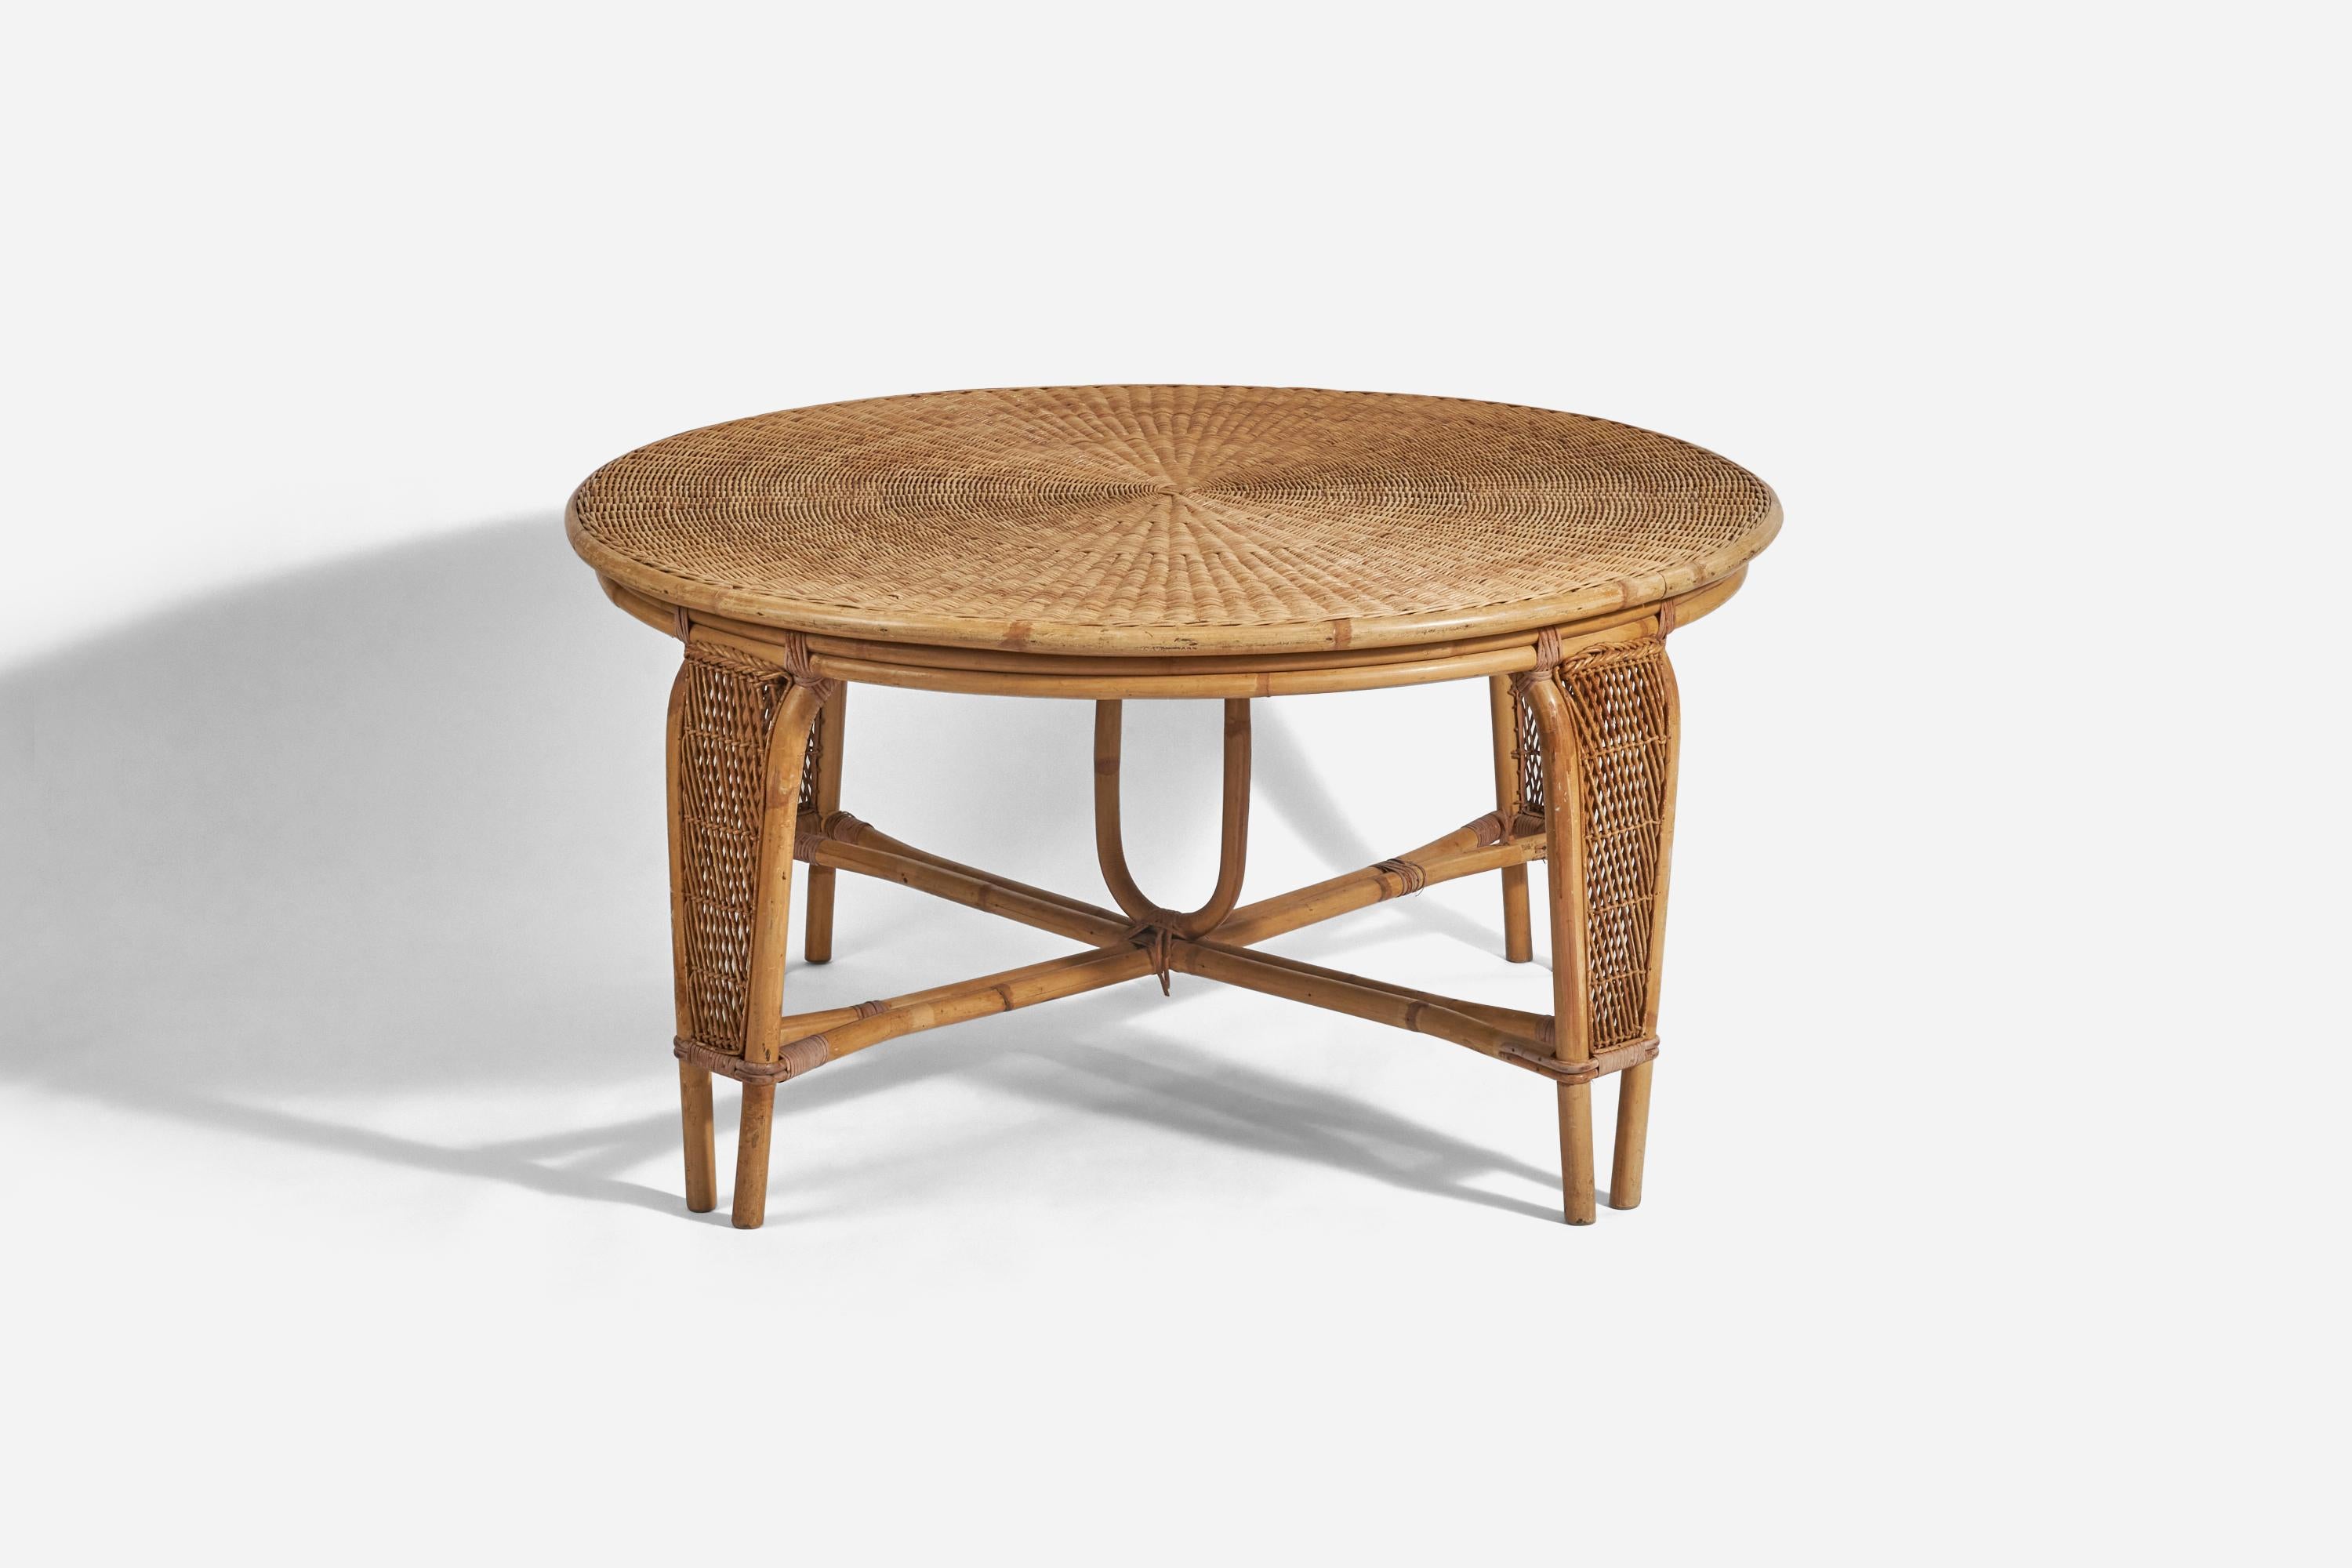 American Calif-asia, Dining or Games Table, Bamboo, Wicker, USA, C. 1970s